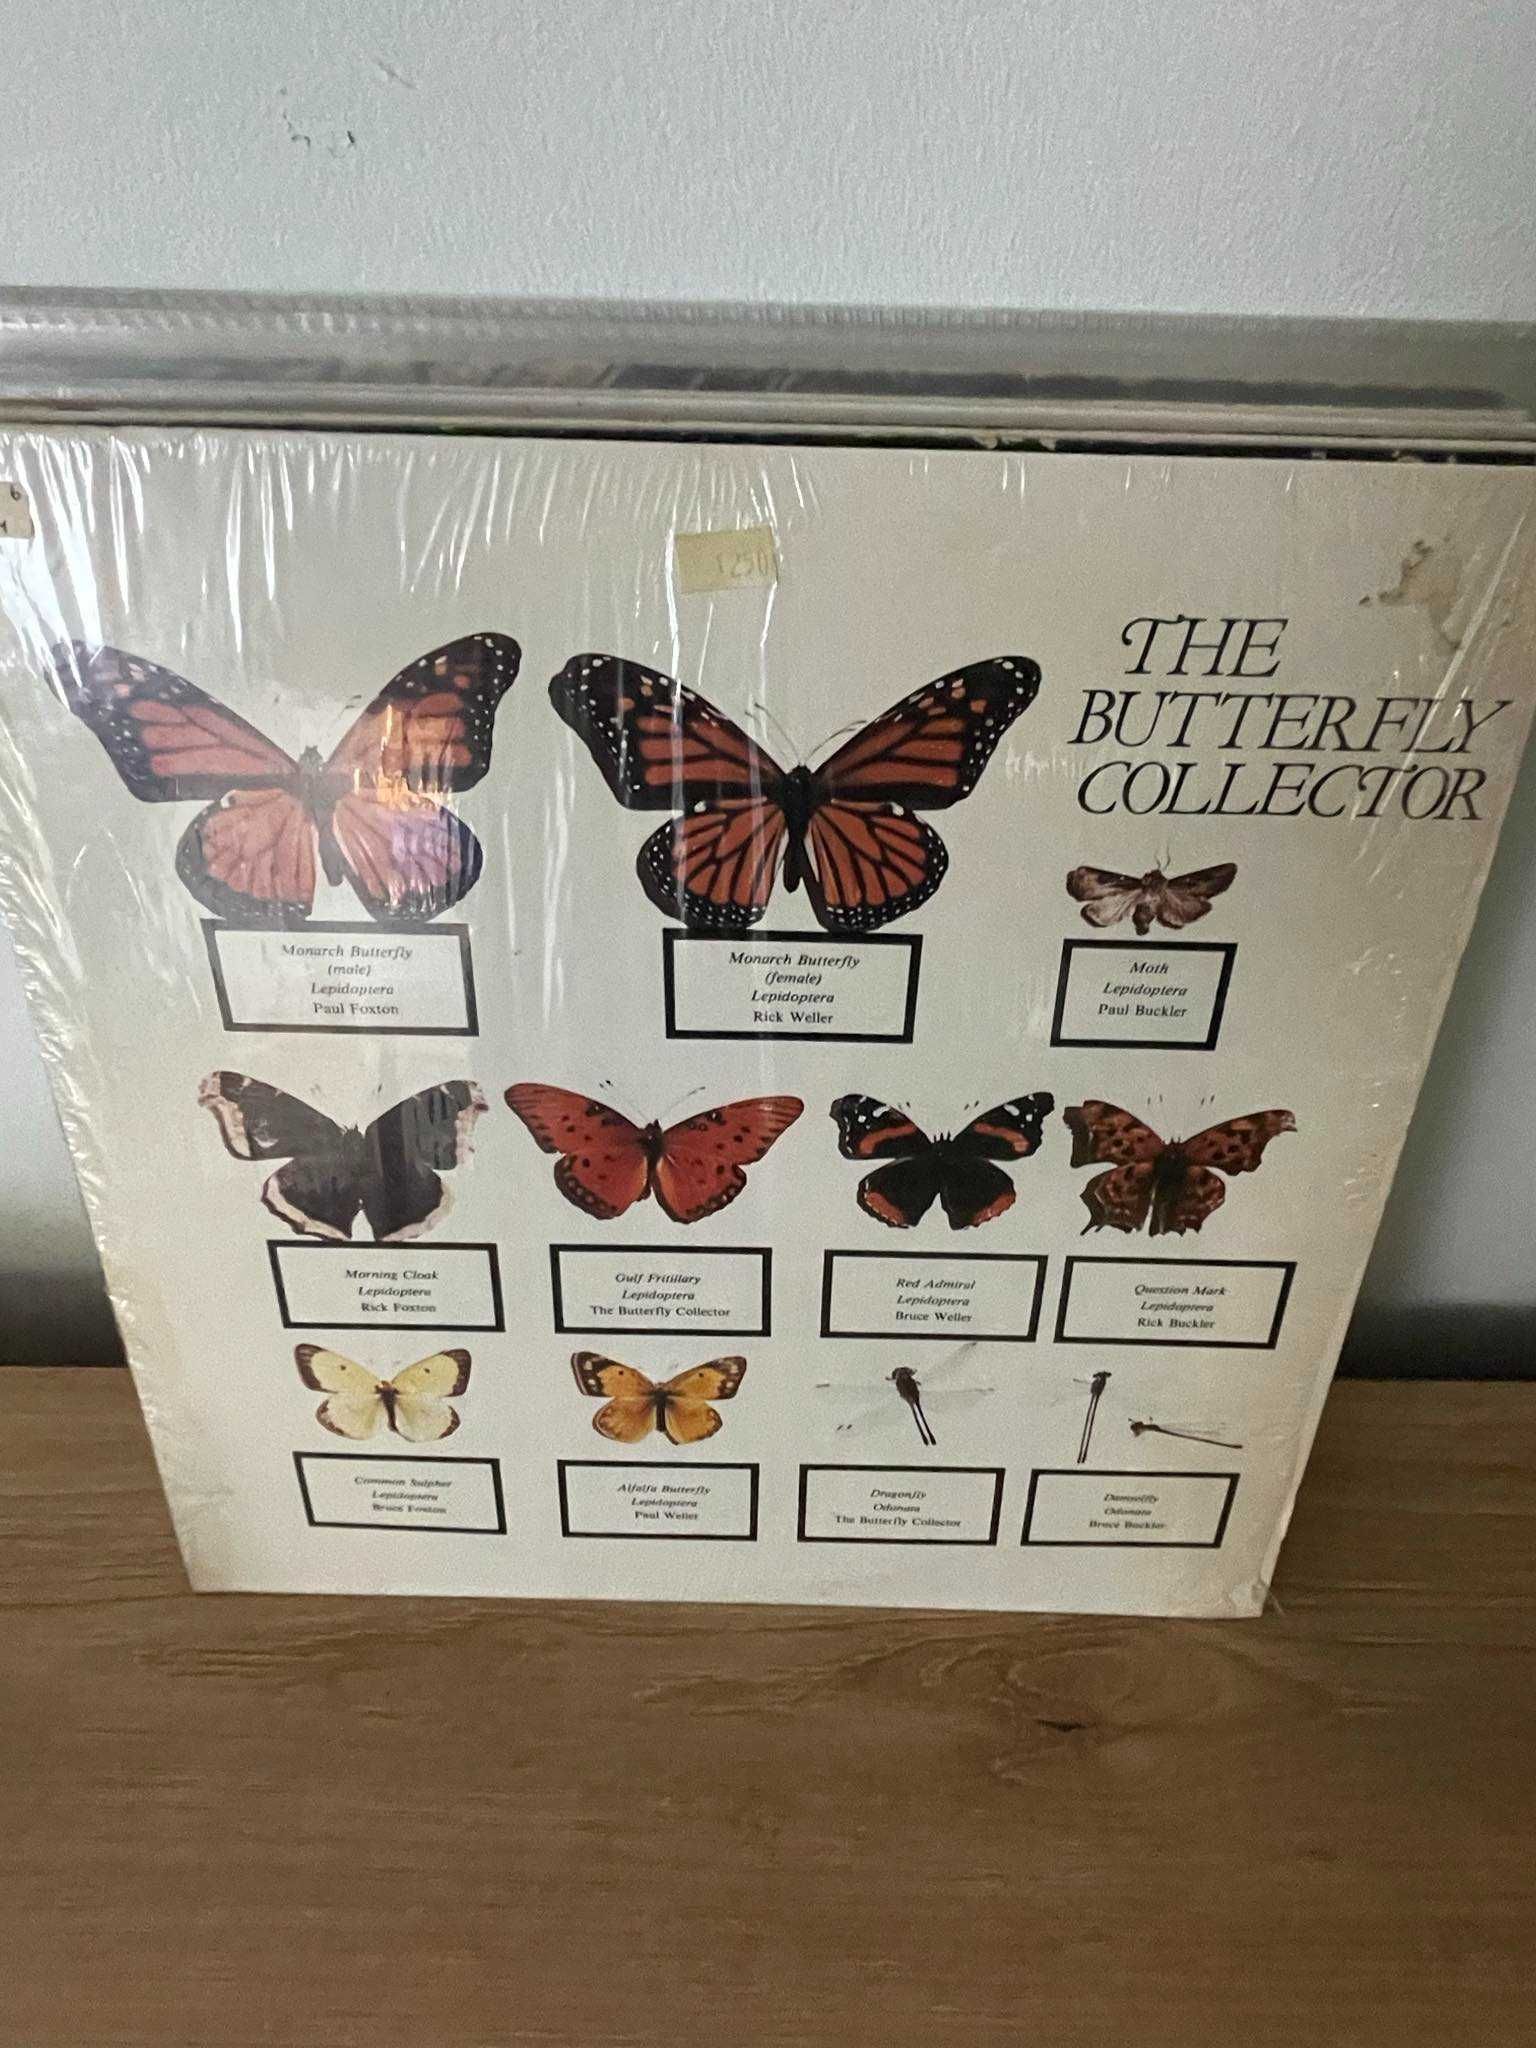 The Jam – The Butterfly Collector